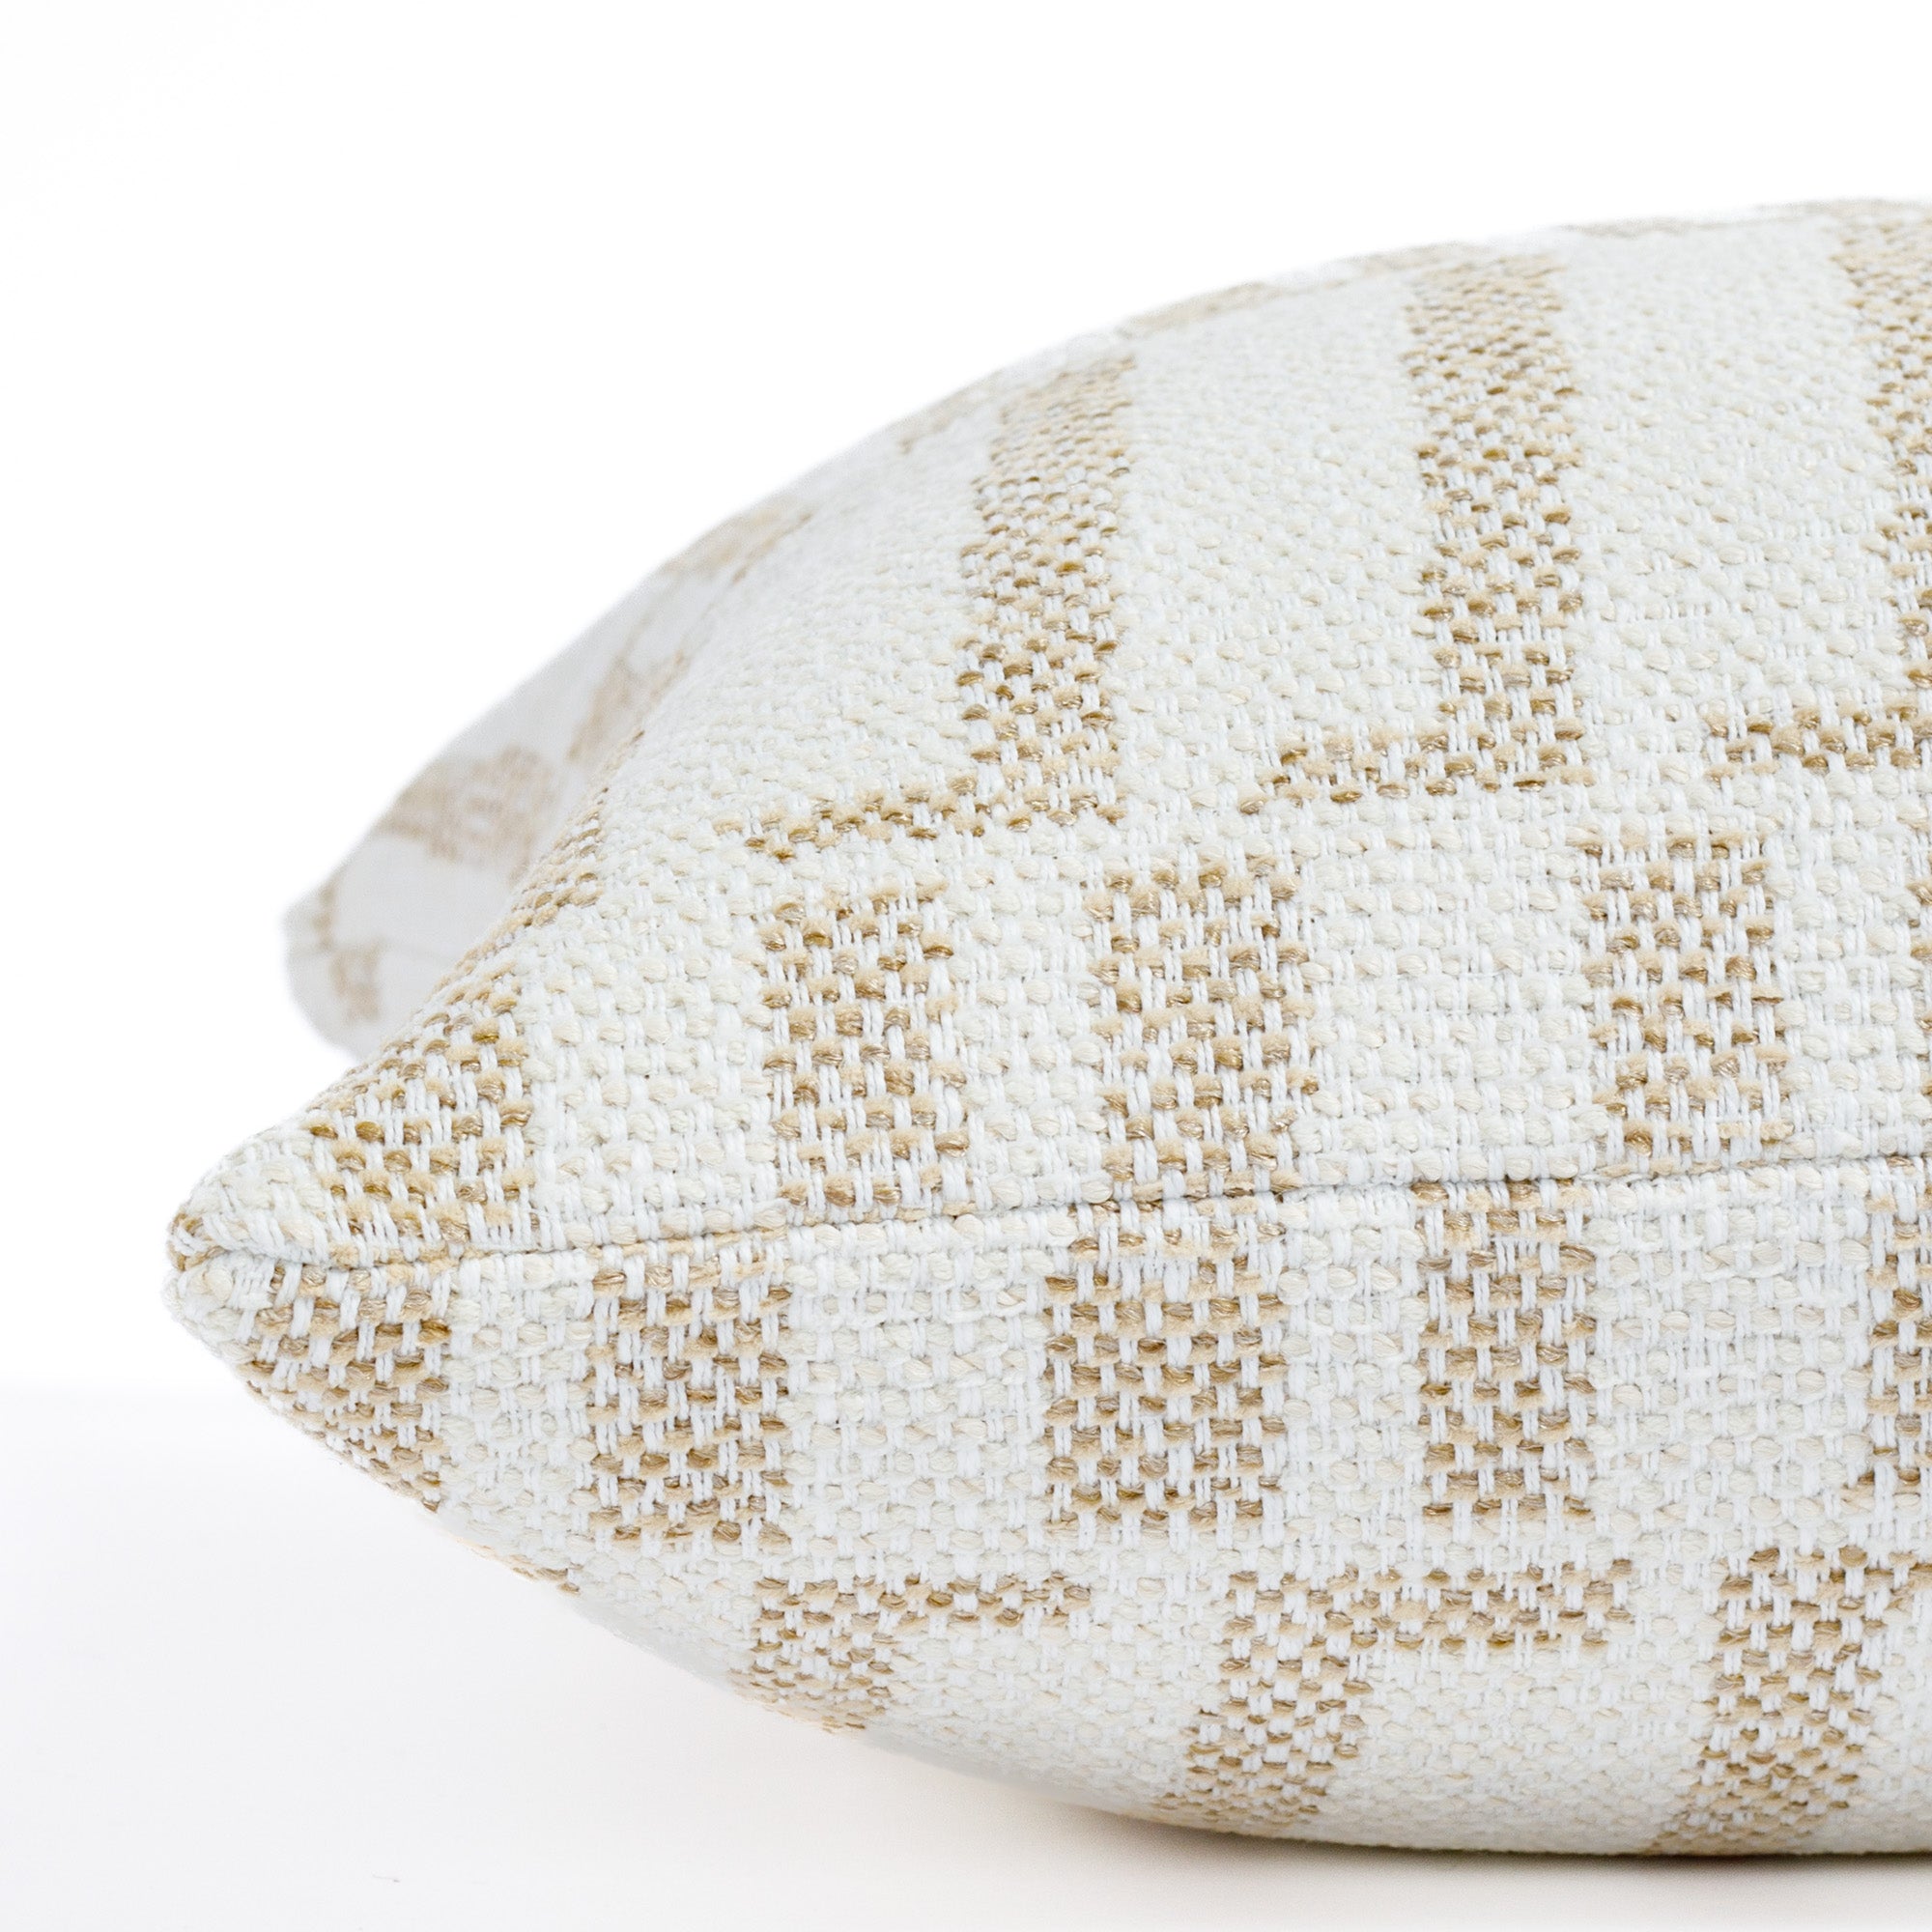 a white and beige graphic organic geometric patterned outdoor throw pillow : close up side view